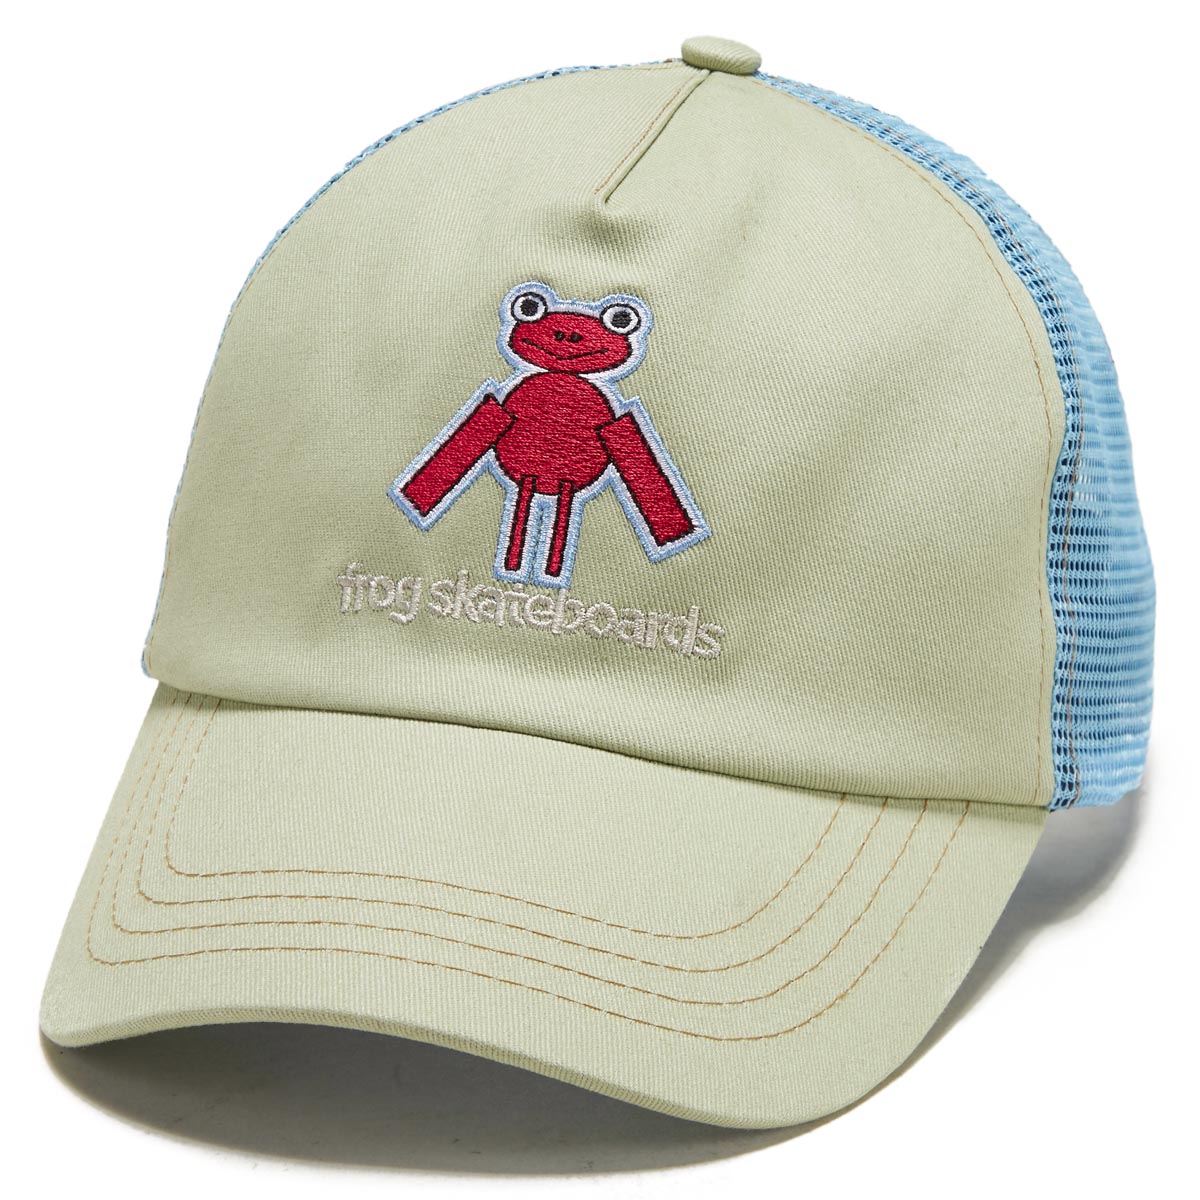 Frog Perfect Frog Trucker Hat - Green/Turquoise image 1